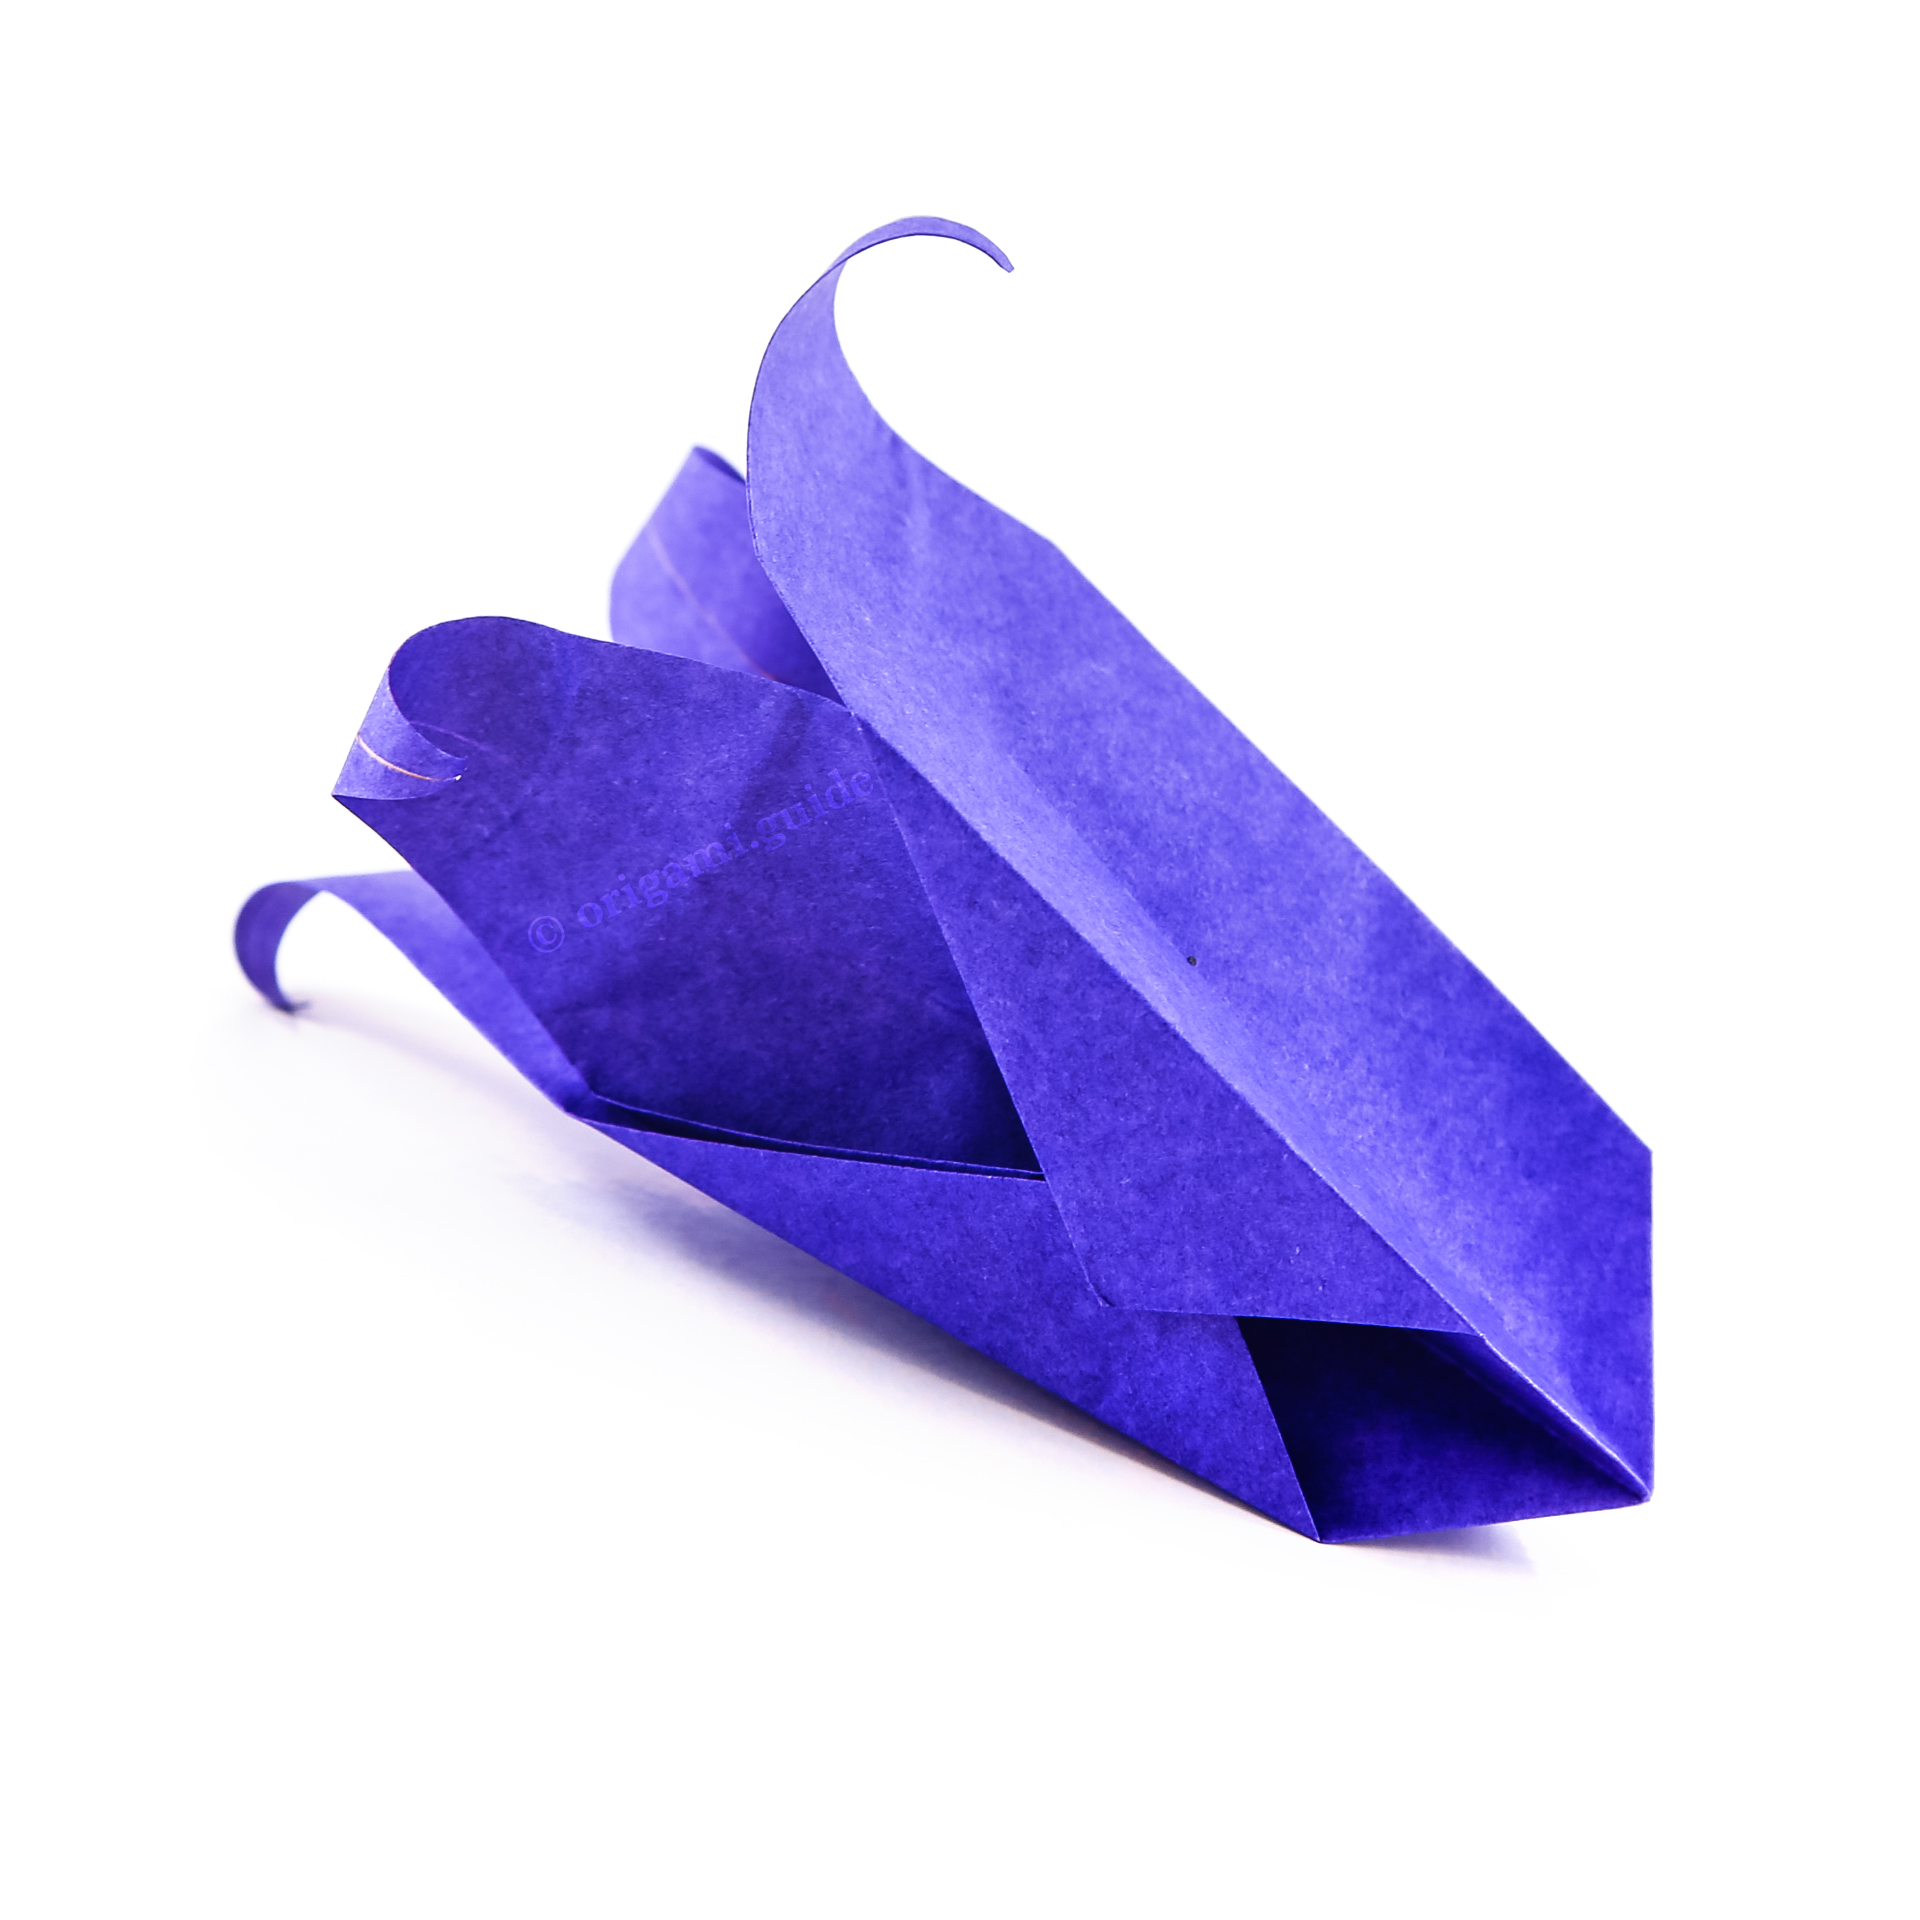 How To Fold An Origami Bluebell Flower - Folding Instructions